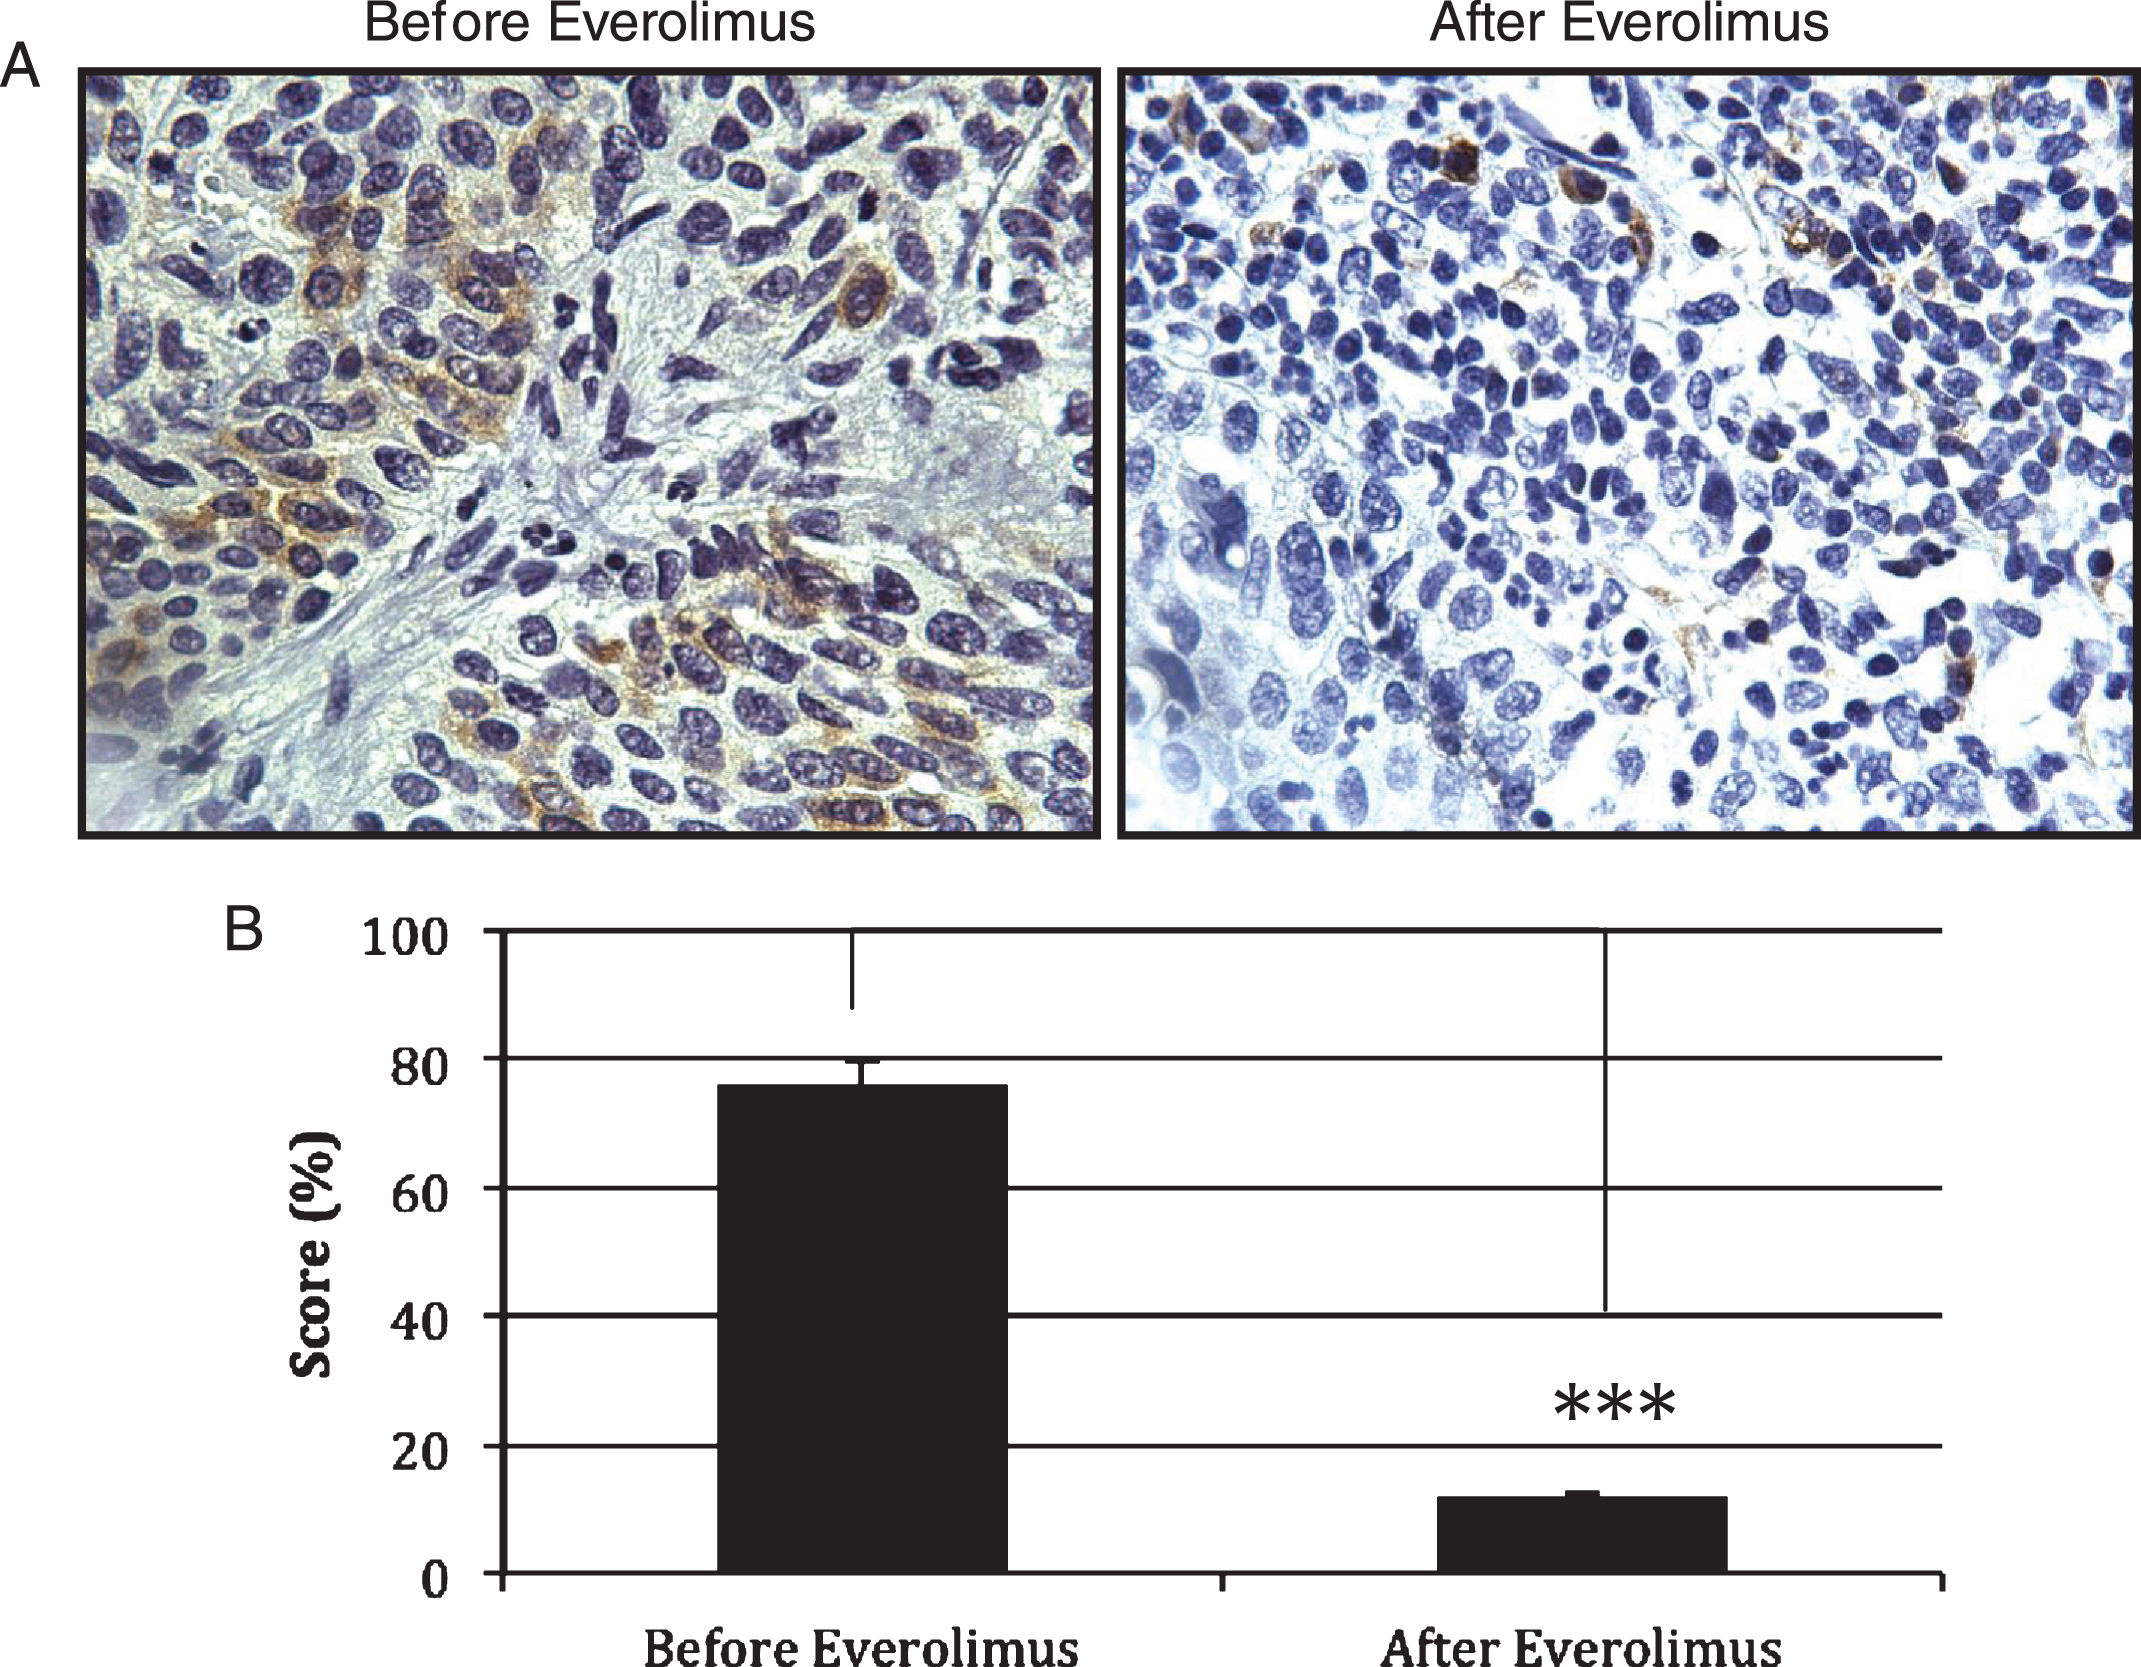 Expression of pS6 as measured of mTOR activity. (A) Immunohistochemistry was used to detect the levels of pS6 in paraffin-embedded tissues of patients treated with Everolimus. (B) Quantification of the immunohistochemistry data in 3 patients with residual disease (n = 3) revealed a significant decrease in pS6 expression as observed in tumors treated with Everolimus (p = 0.021). Treatment of Everolimus started 4 weeks before the combined gemcitabine/radiotherapy treatment. Everolimus was continued during the chemoradiation regimen and for one extra month after the concurrent chemoradiation regimen has been completed.